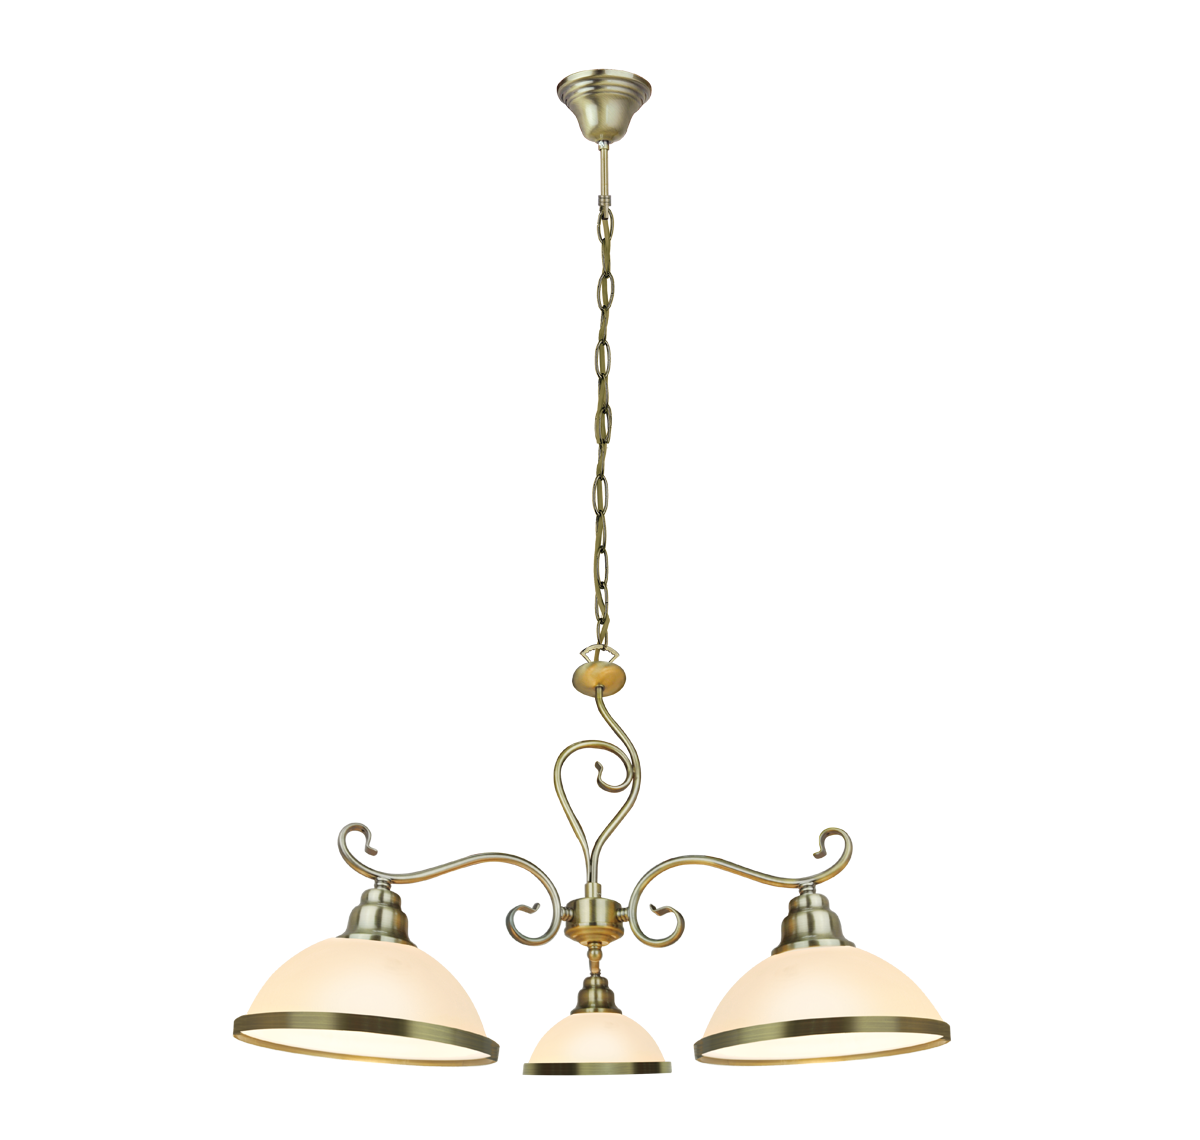 Havells Ornalite Chandelier 1 X 3LS E27 BRZ Ceiling mounted Chandelier